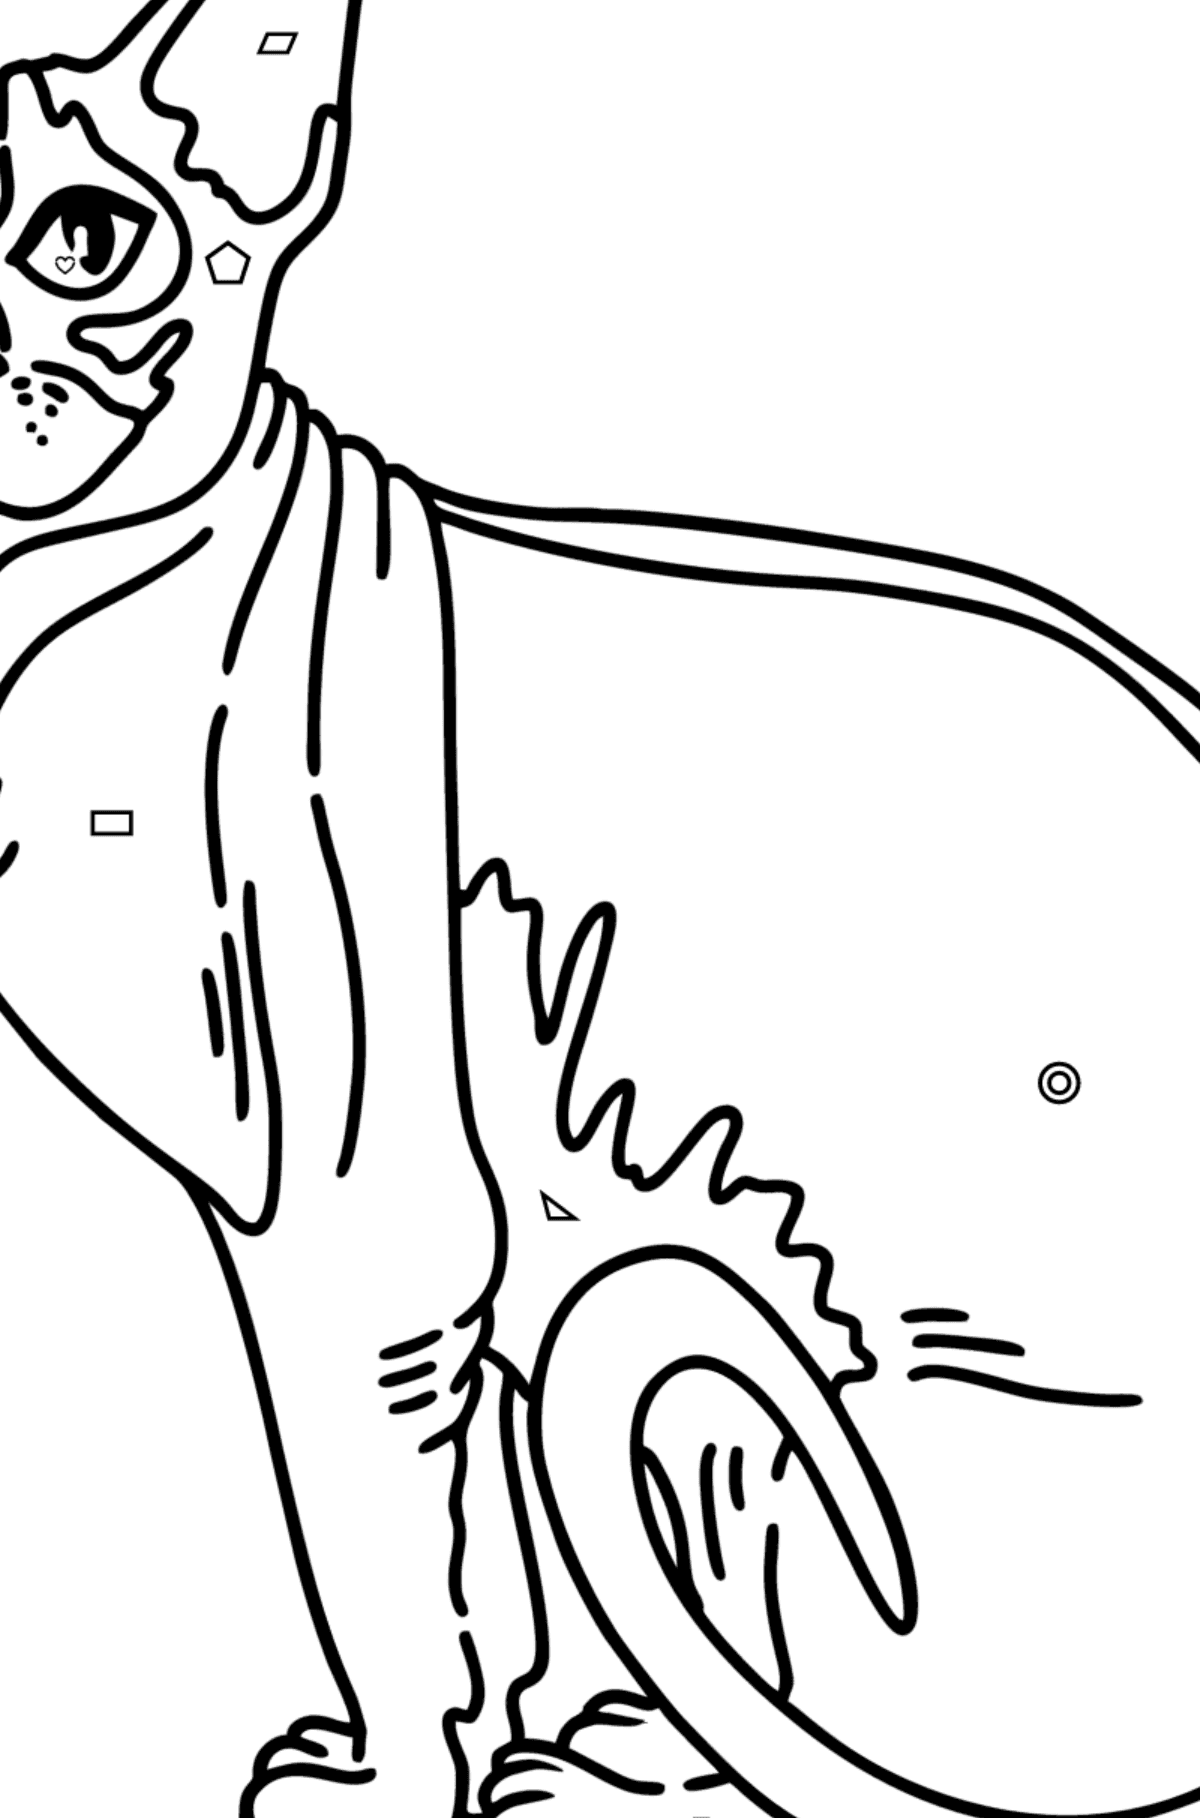 Sphynx Cat coloring page - Coloring by Geometric Shapes for Kids